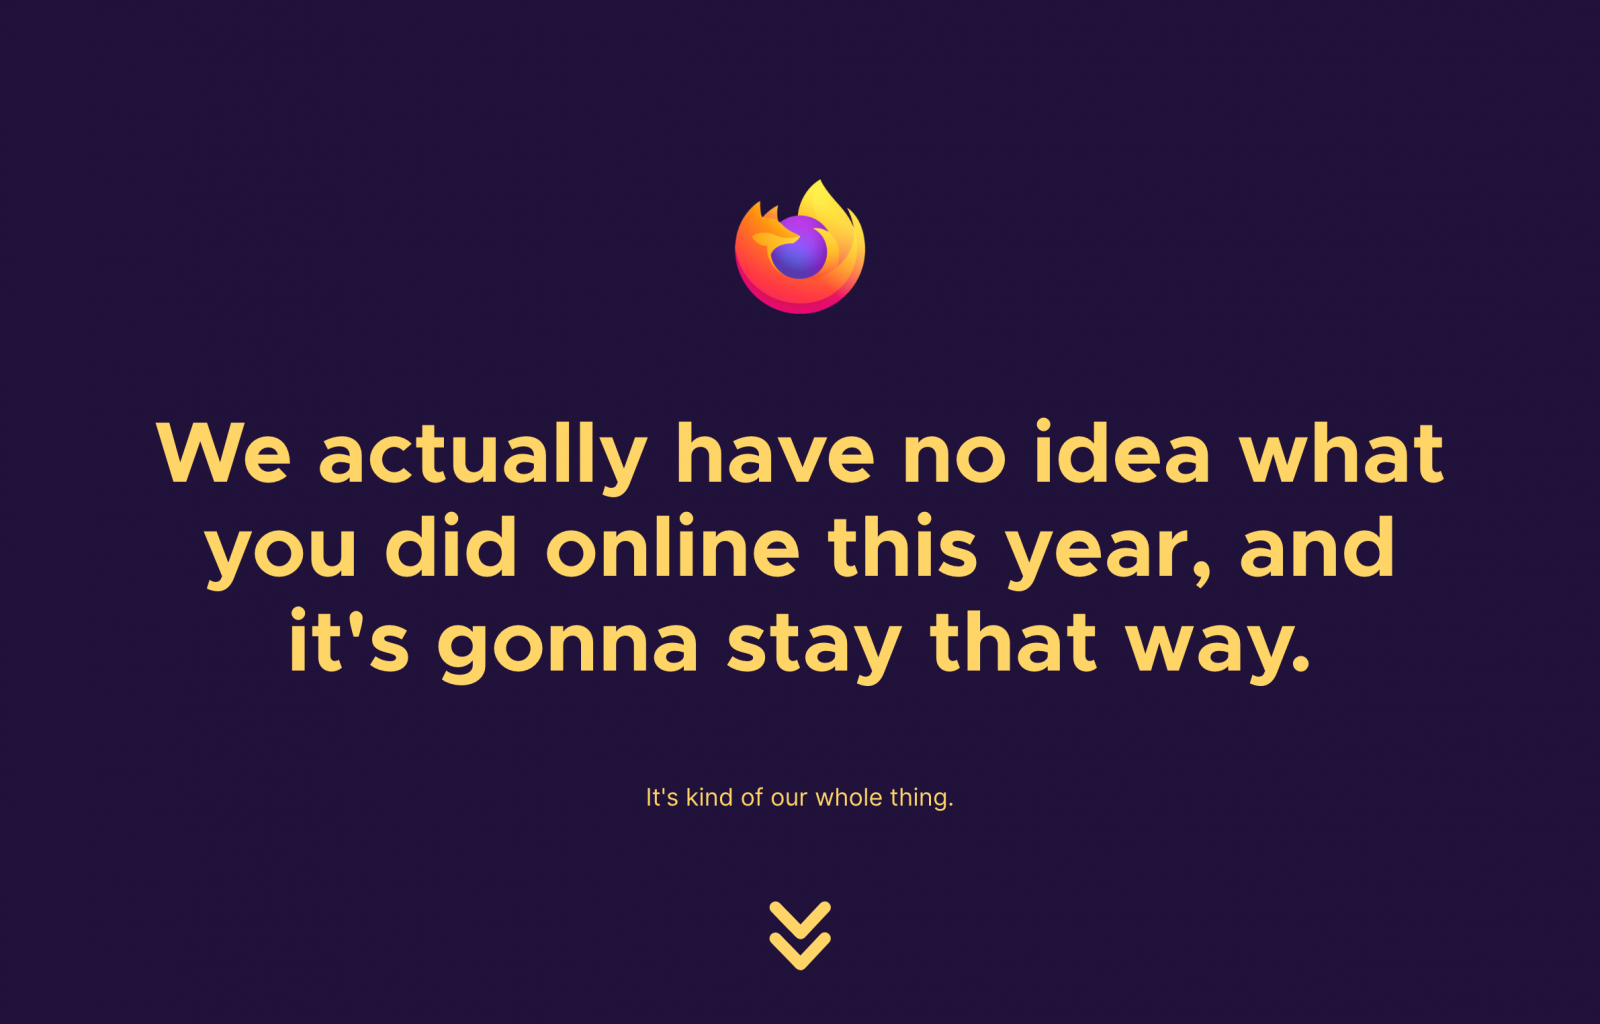 We actually have no idea what you did online this year, and it's gonna stay that way.